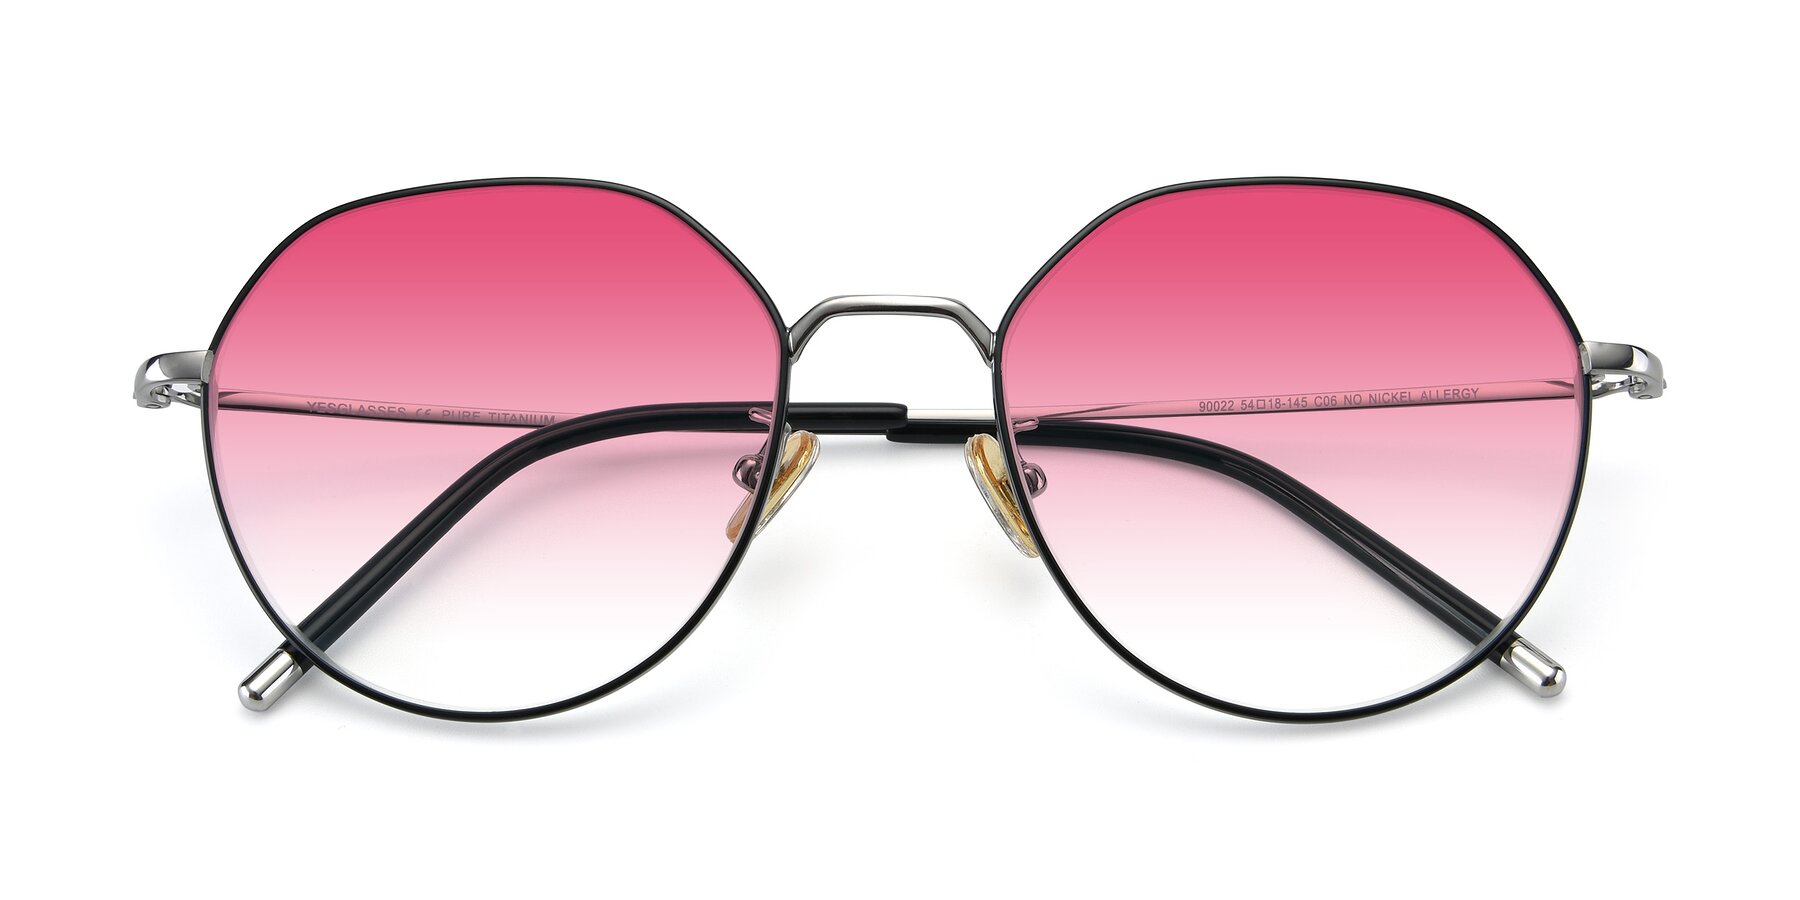 View of 90022 in Black-Silver with Pink Gradient Lenses